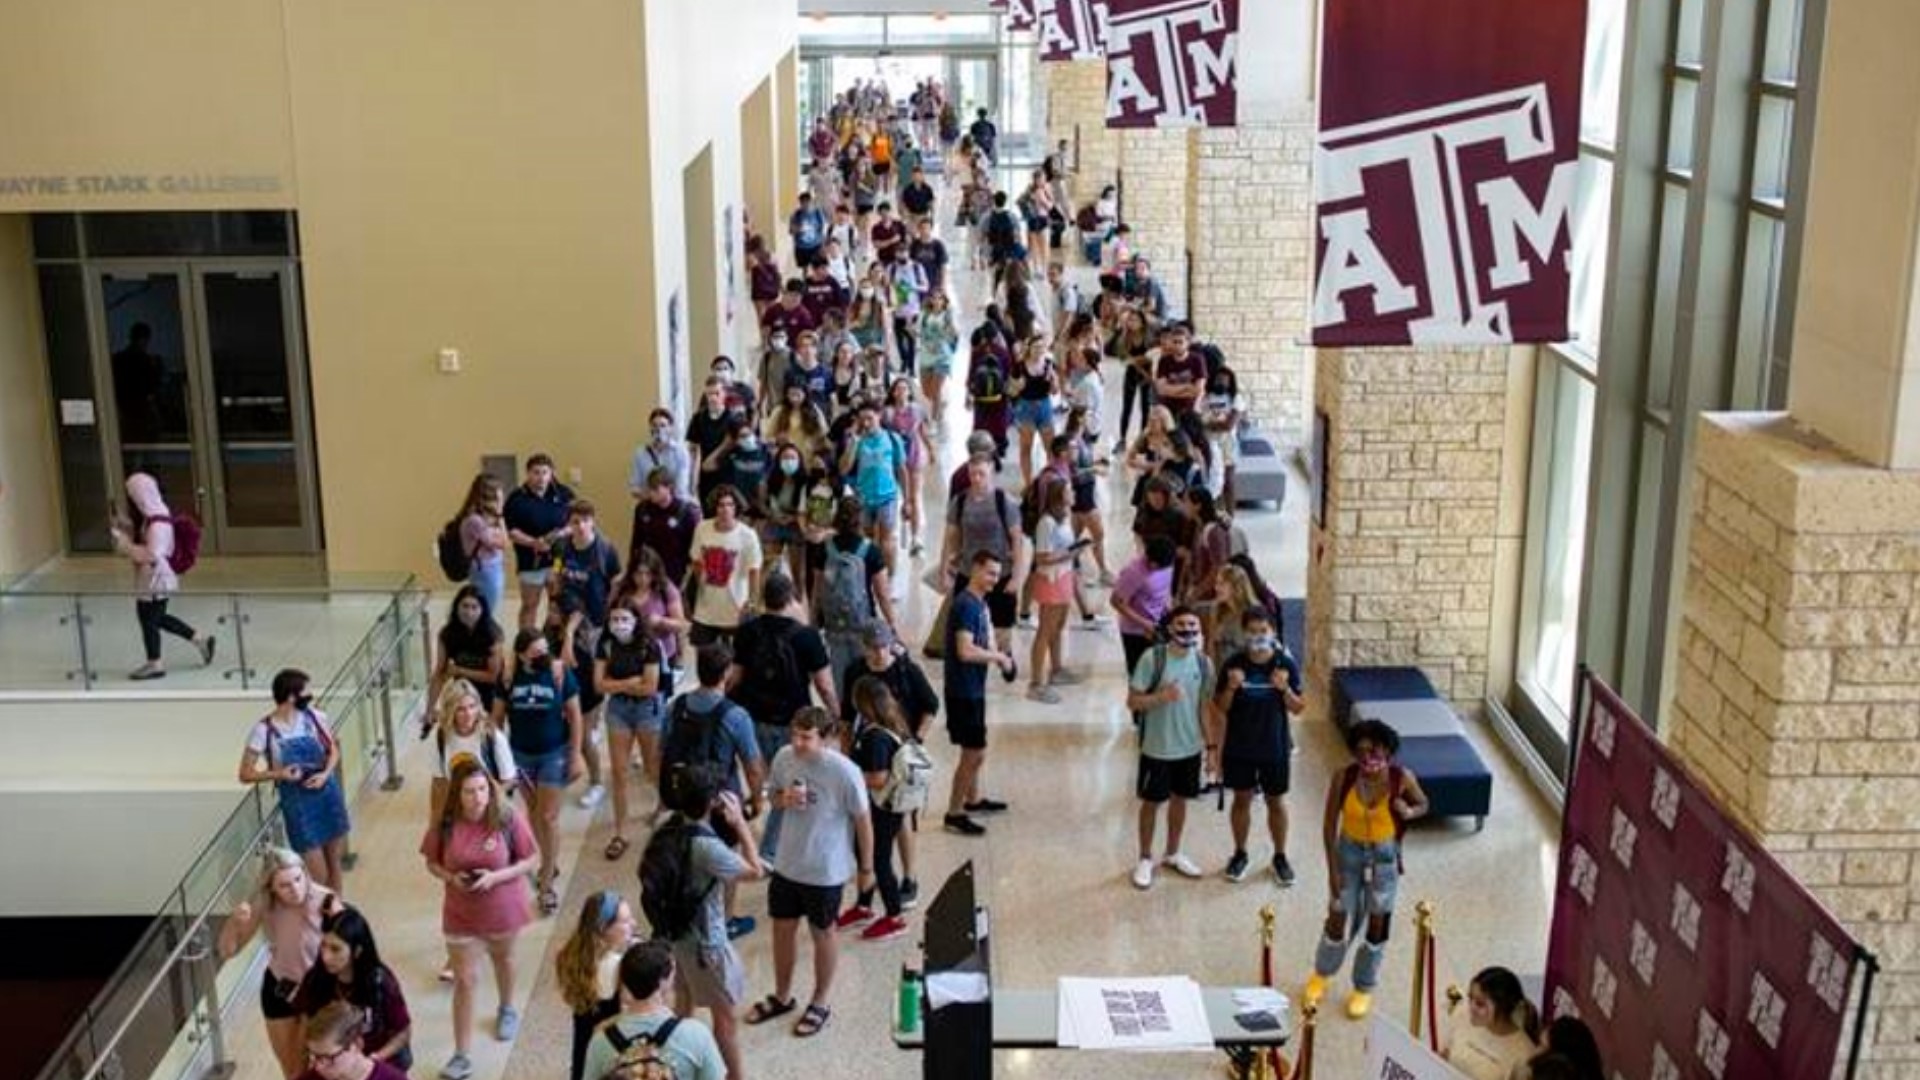 The Fall semester has begun for Texas A&M students, but their course load and class locations aren't the only thing that Aggies are concerned about.